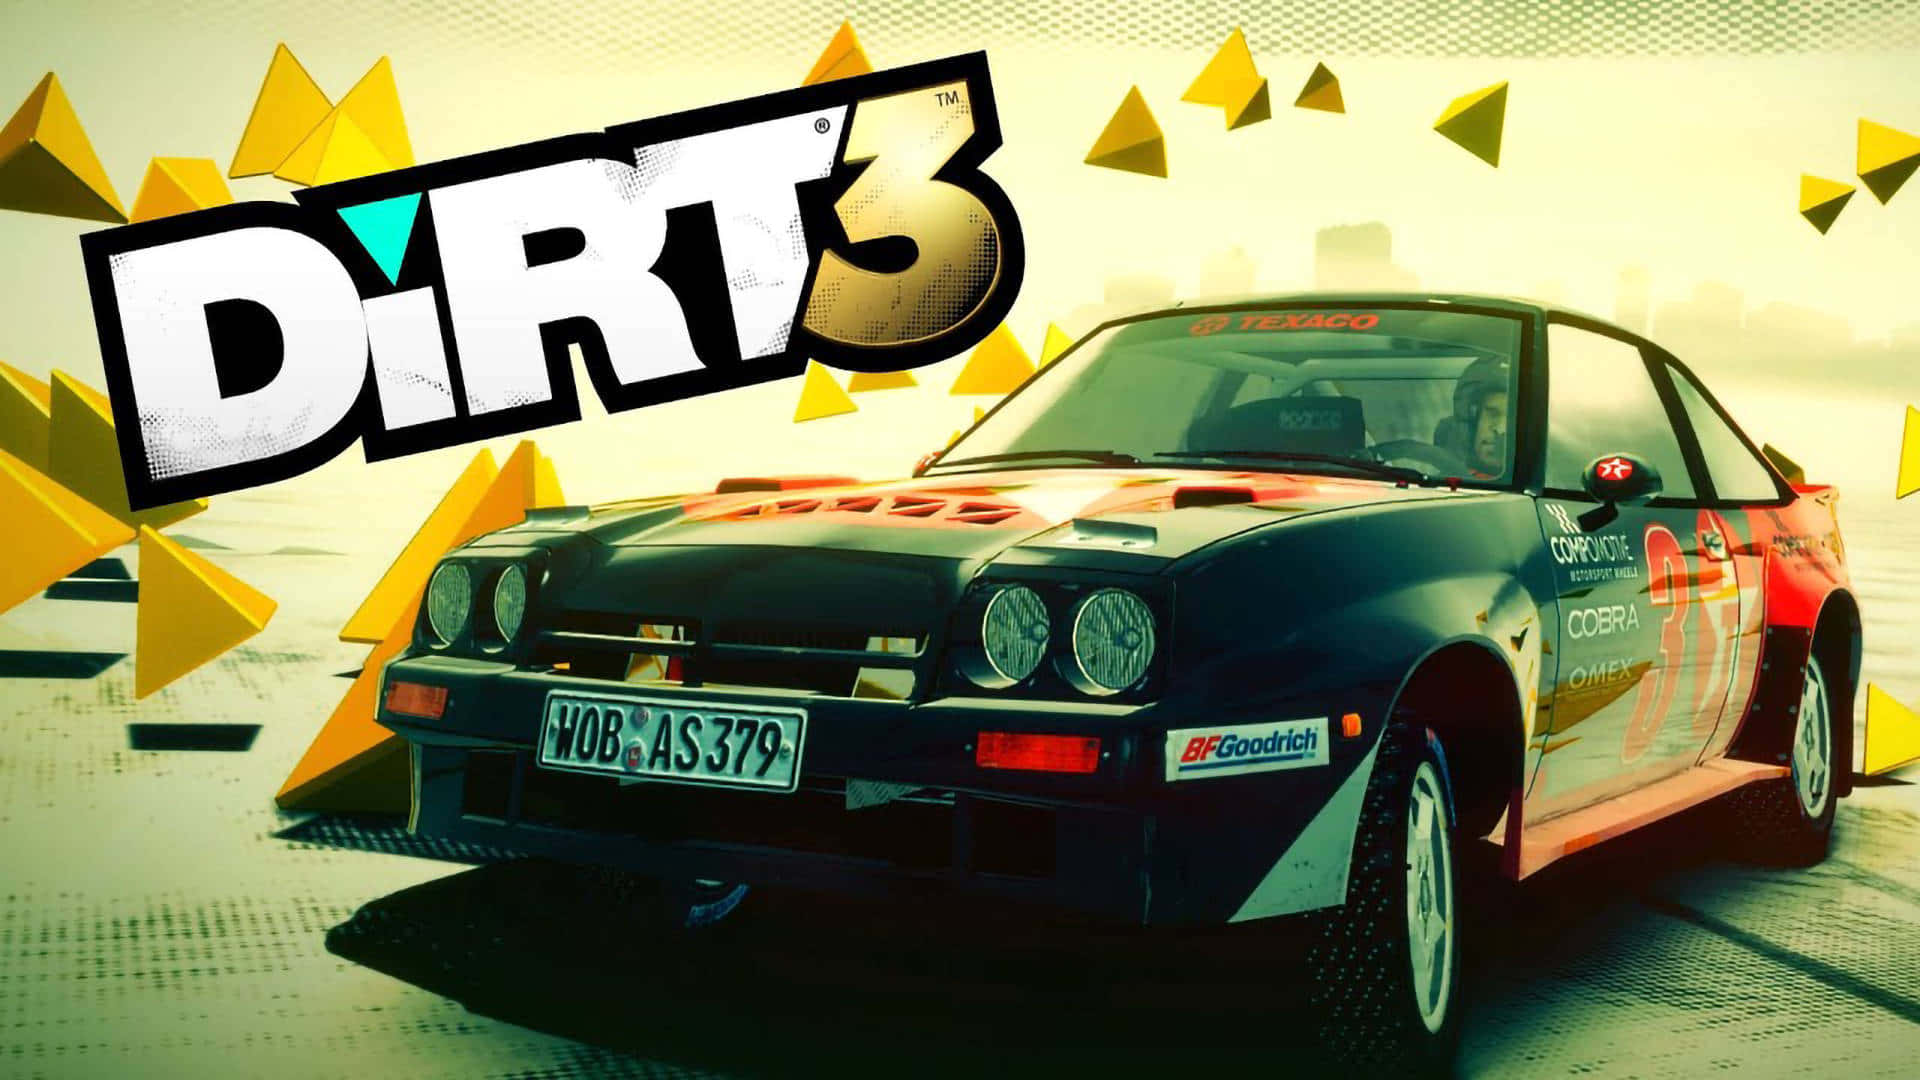 Get your engines running with Dirt 3